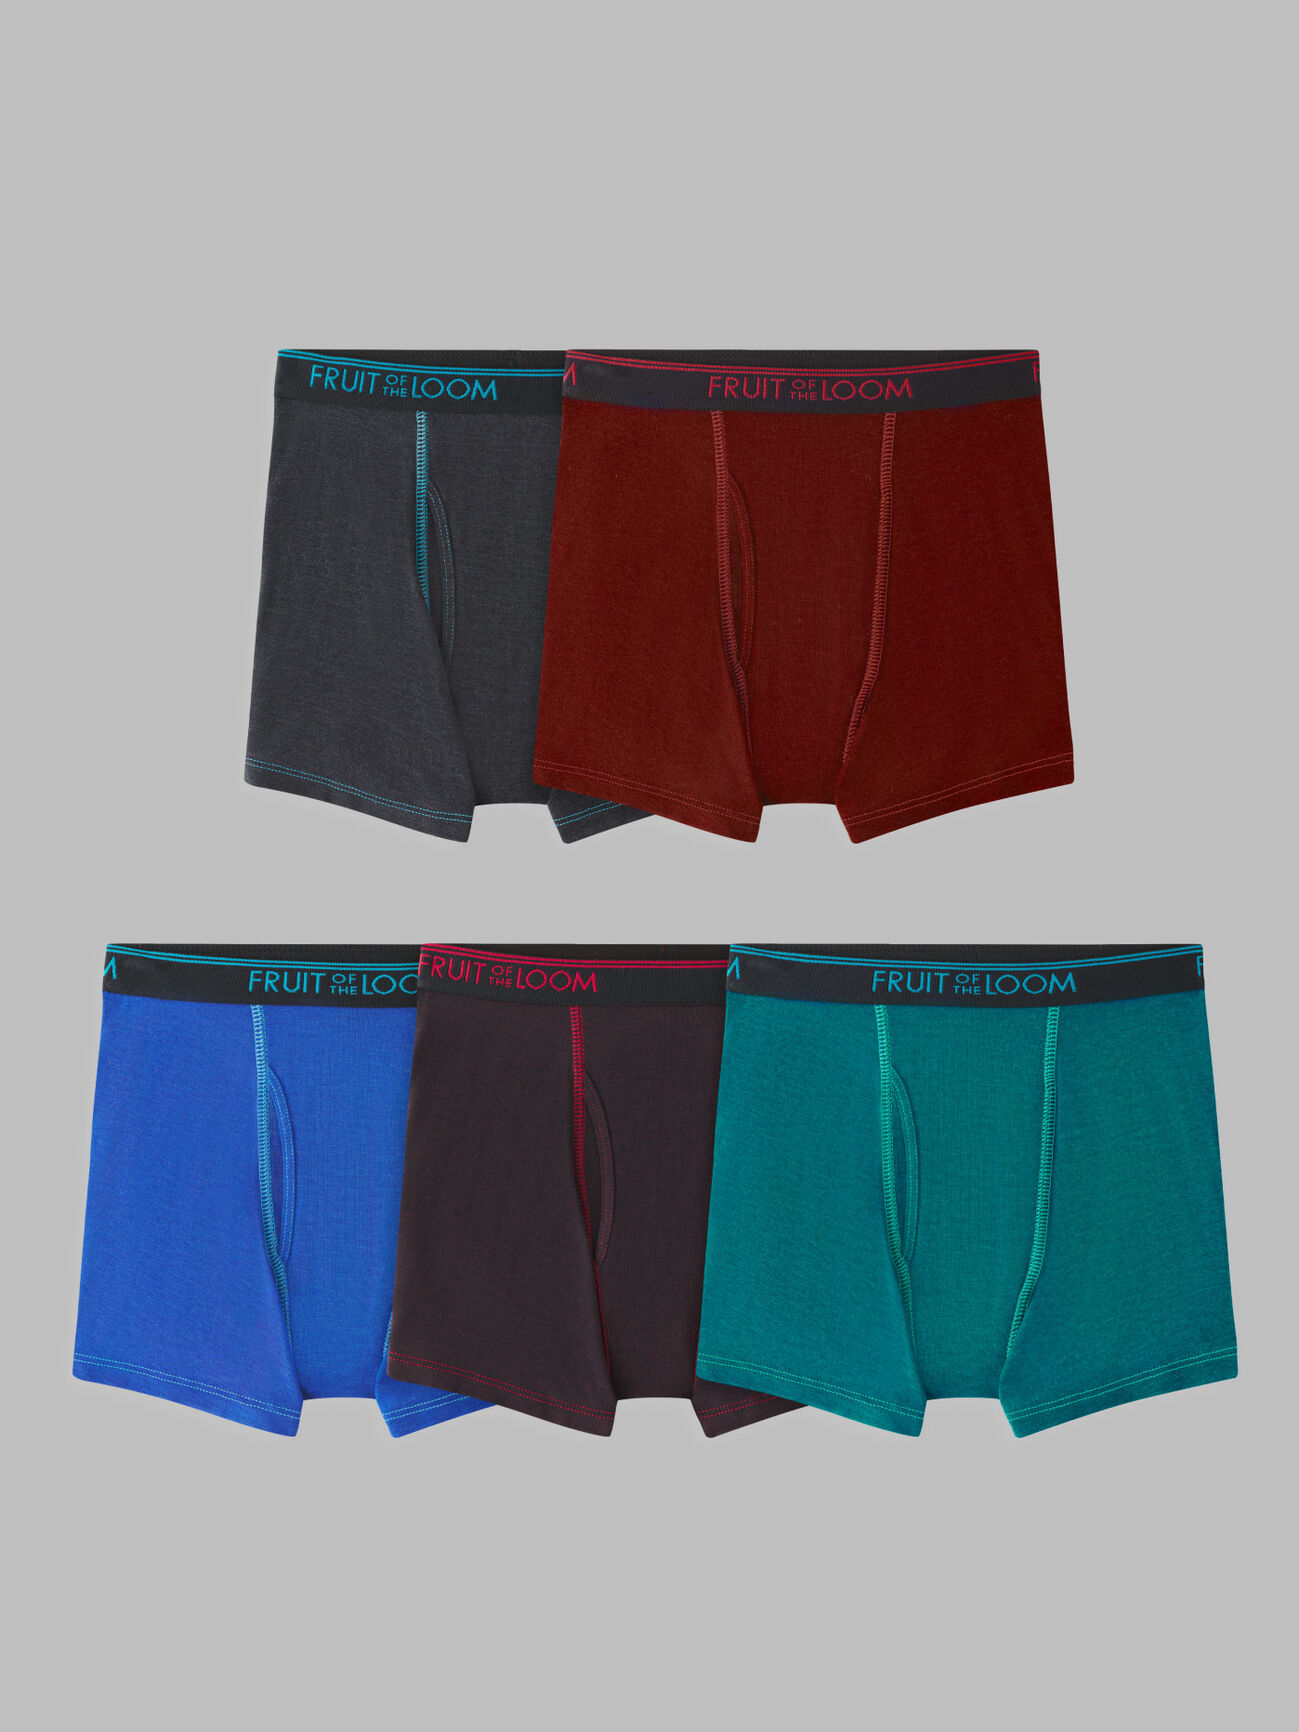 Underwear Expert - Get your game on boys. Score 25% off all toys